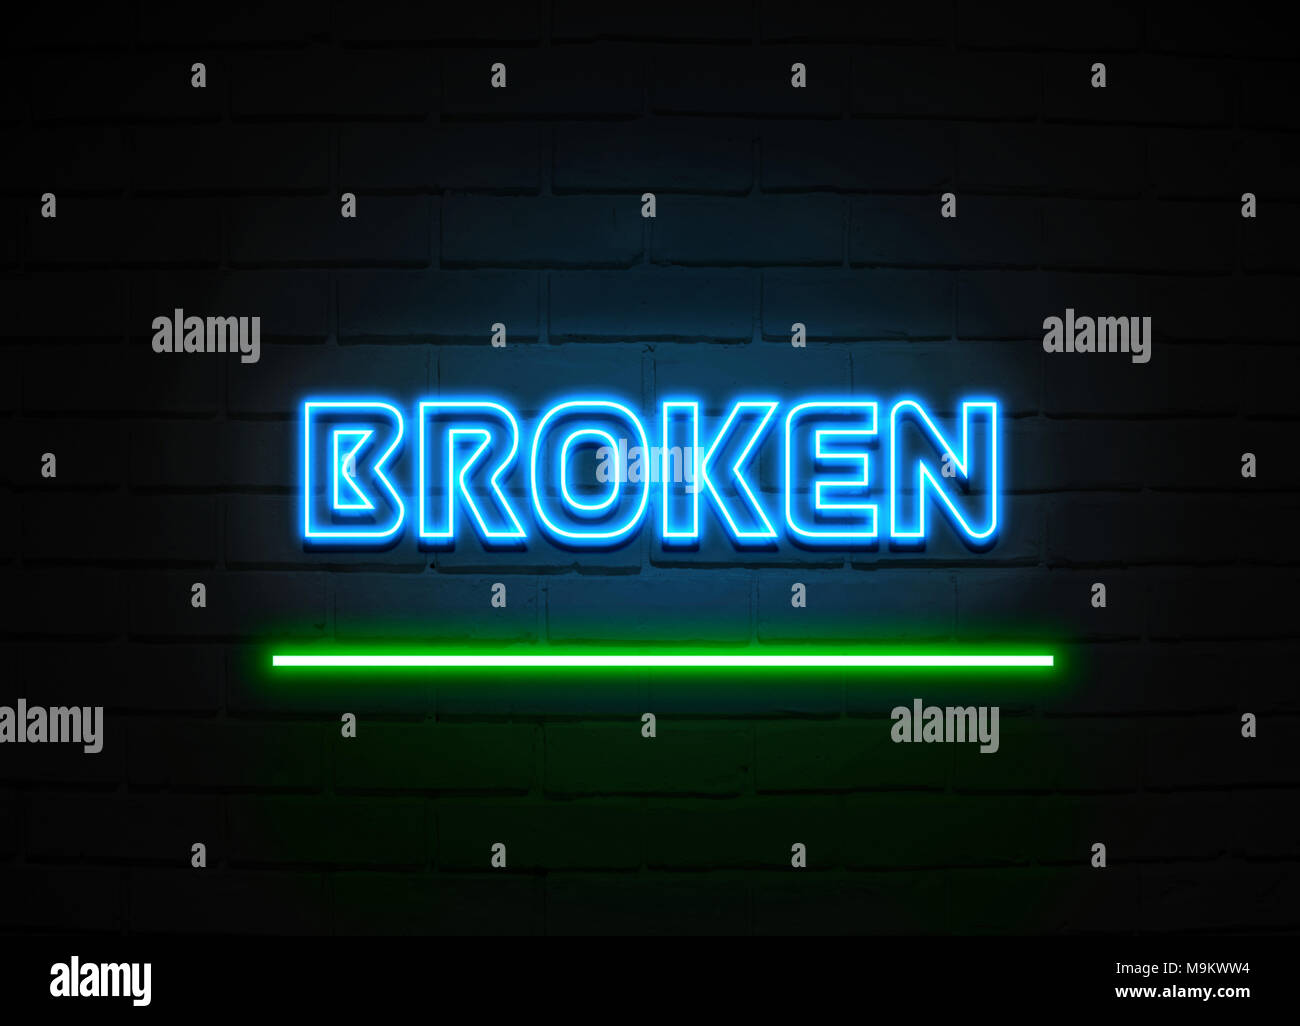 Broken neon sign - Glowing Neon Sign on brickwall wall - 3D rendered royalty free stock illustration. Stock Photo